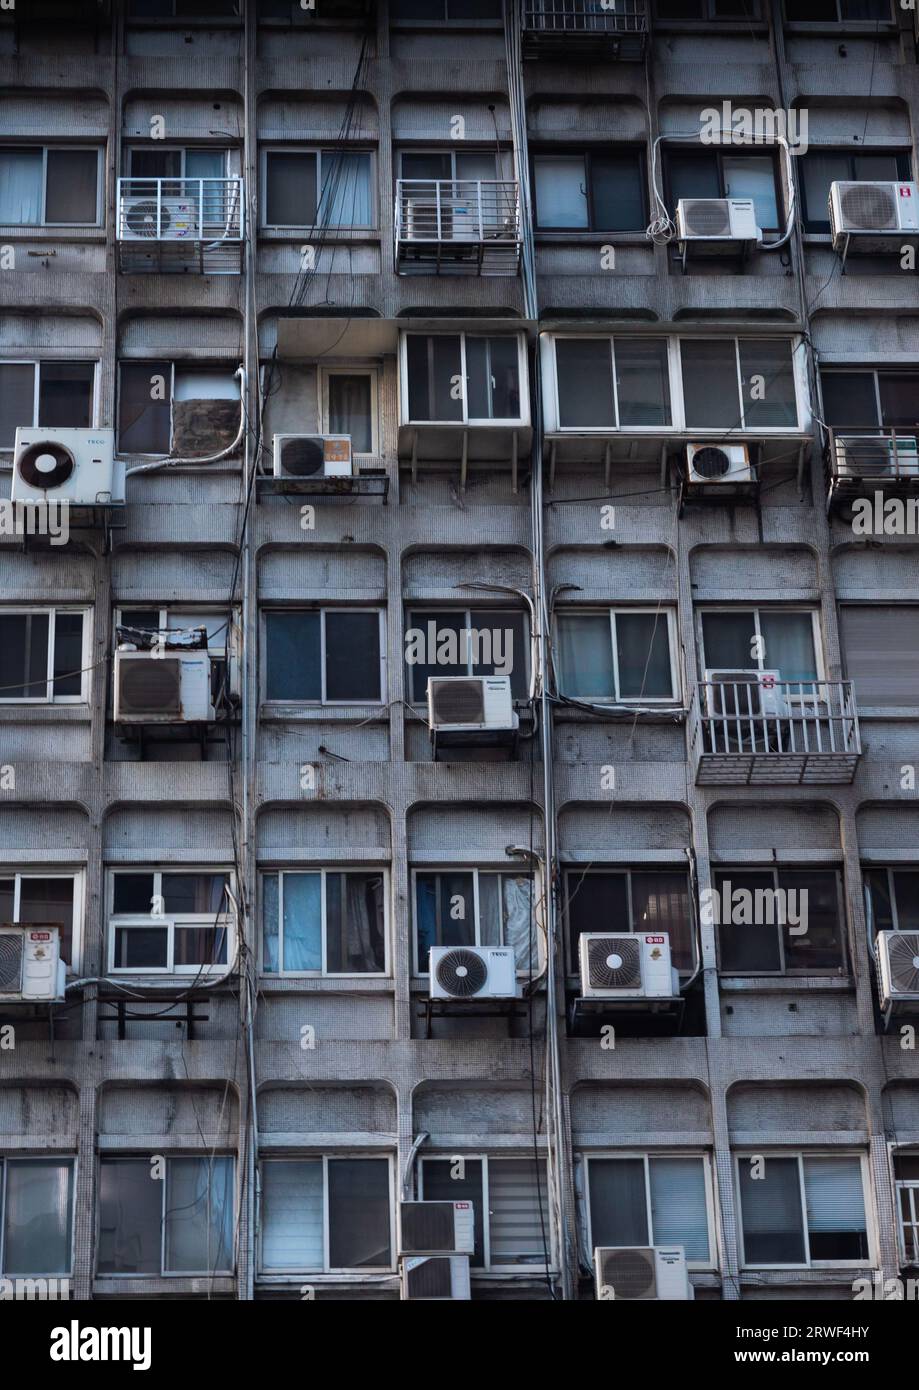 Air conditioners on a building, Zhongzheng District, Taipei, Taiwan Stock Photo